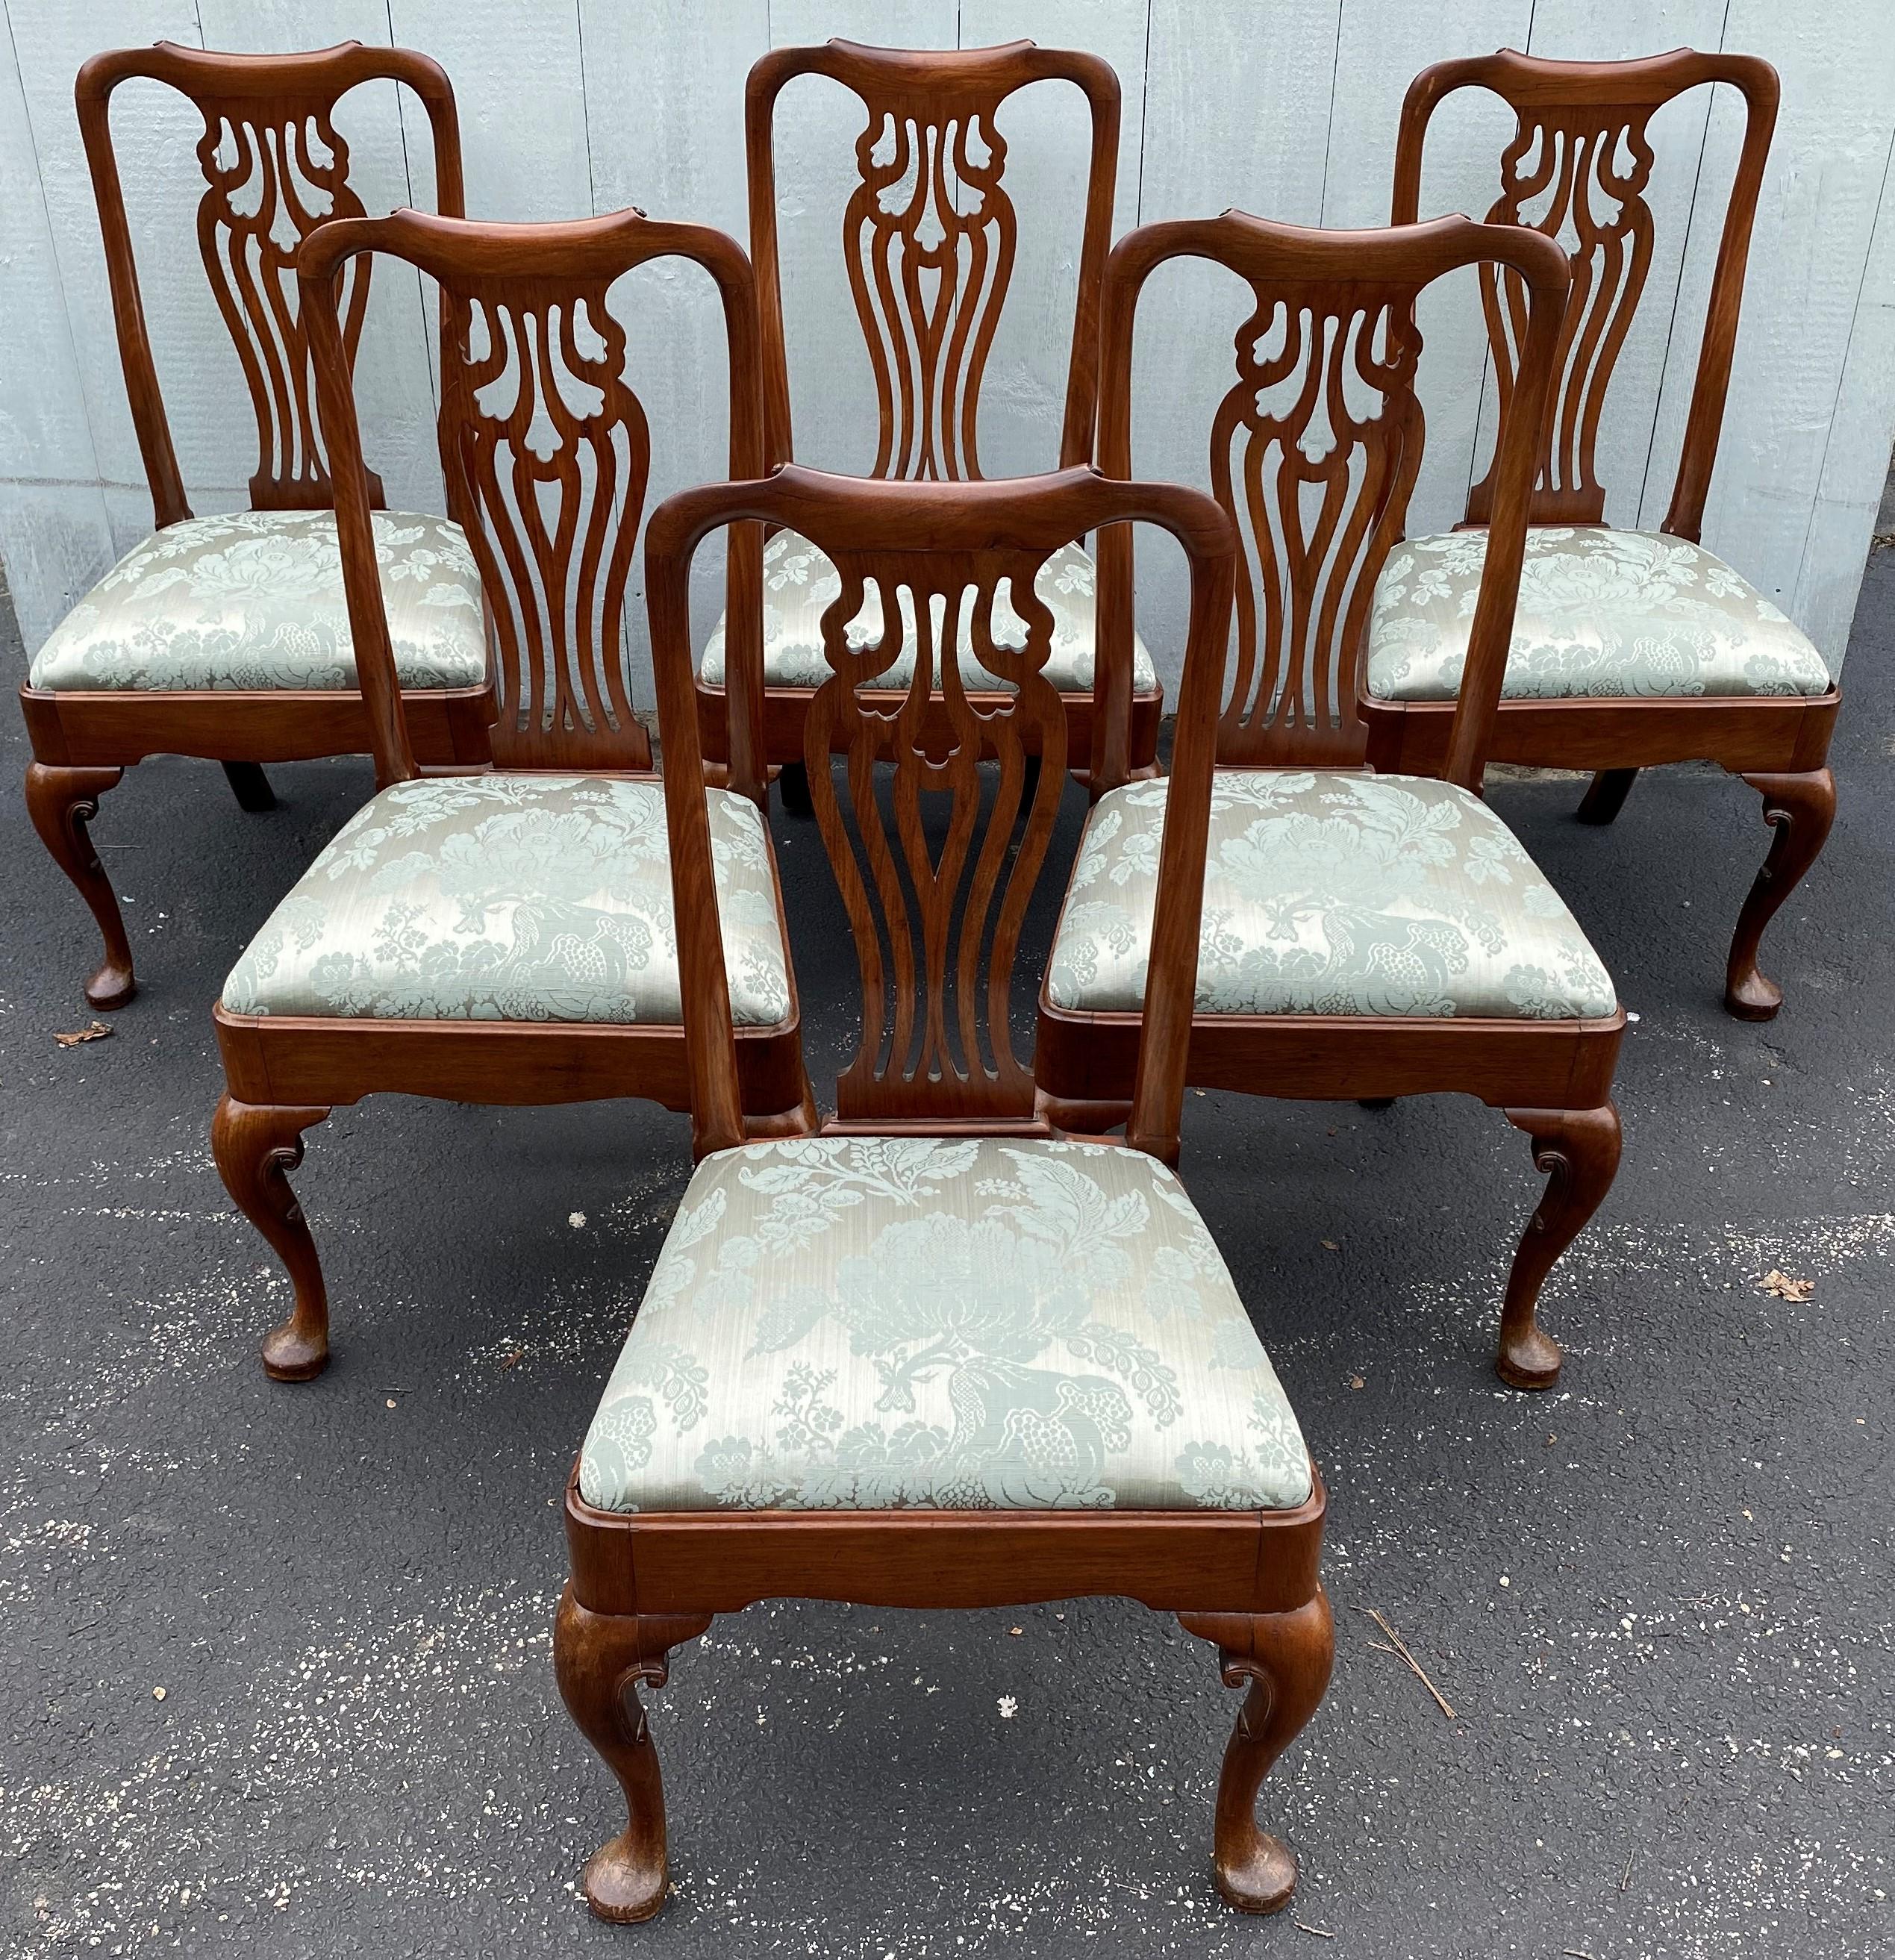 An exceptional set of six Queen Anne walnut dining or side chairs with hand carved reticulated splats and front cabriole legs terminating with pad feet. The slip seats have been recently refreshed with a pale green Damask upholstery. This set is